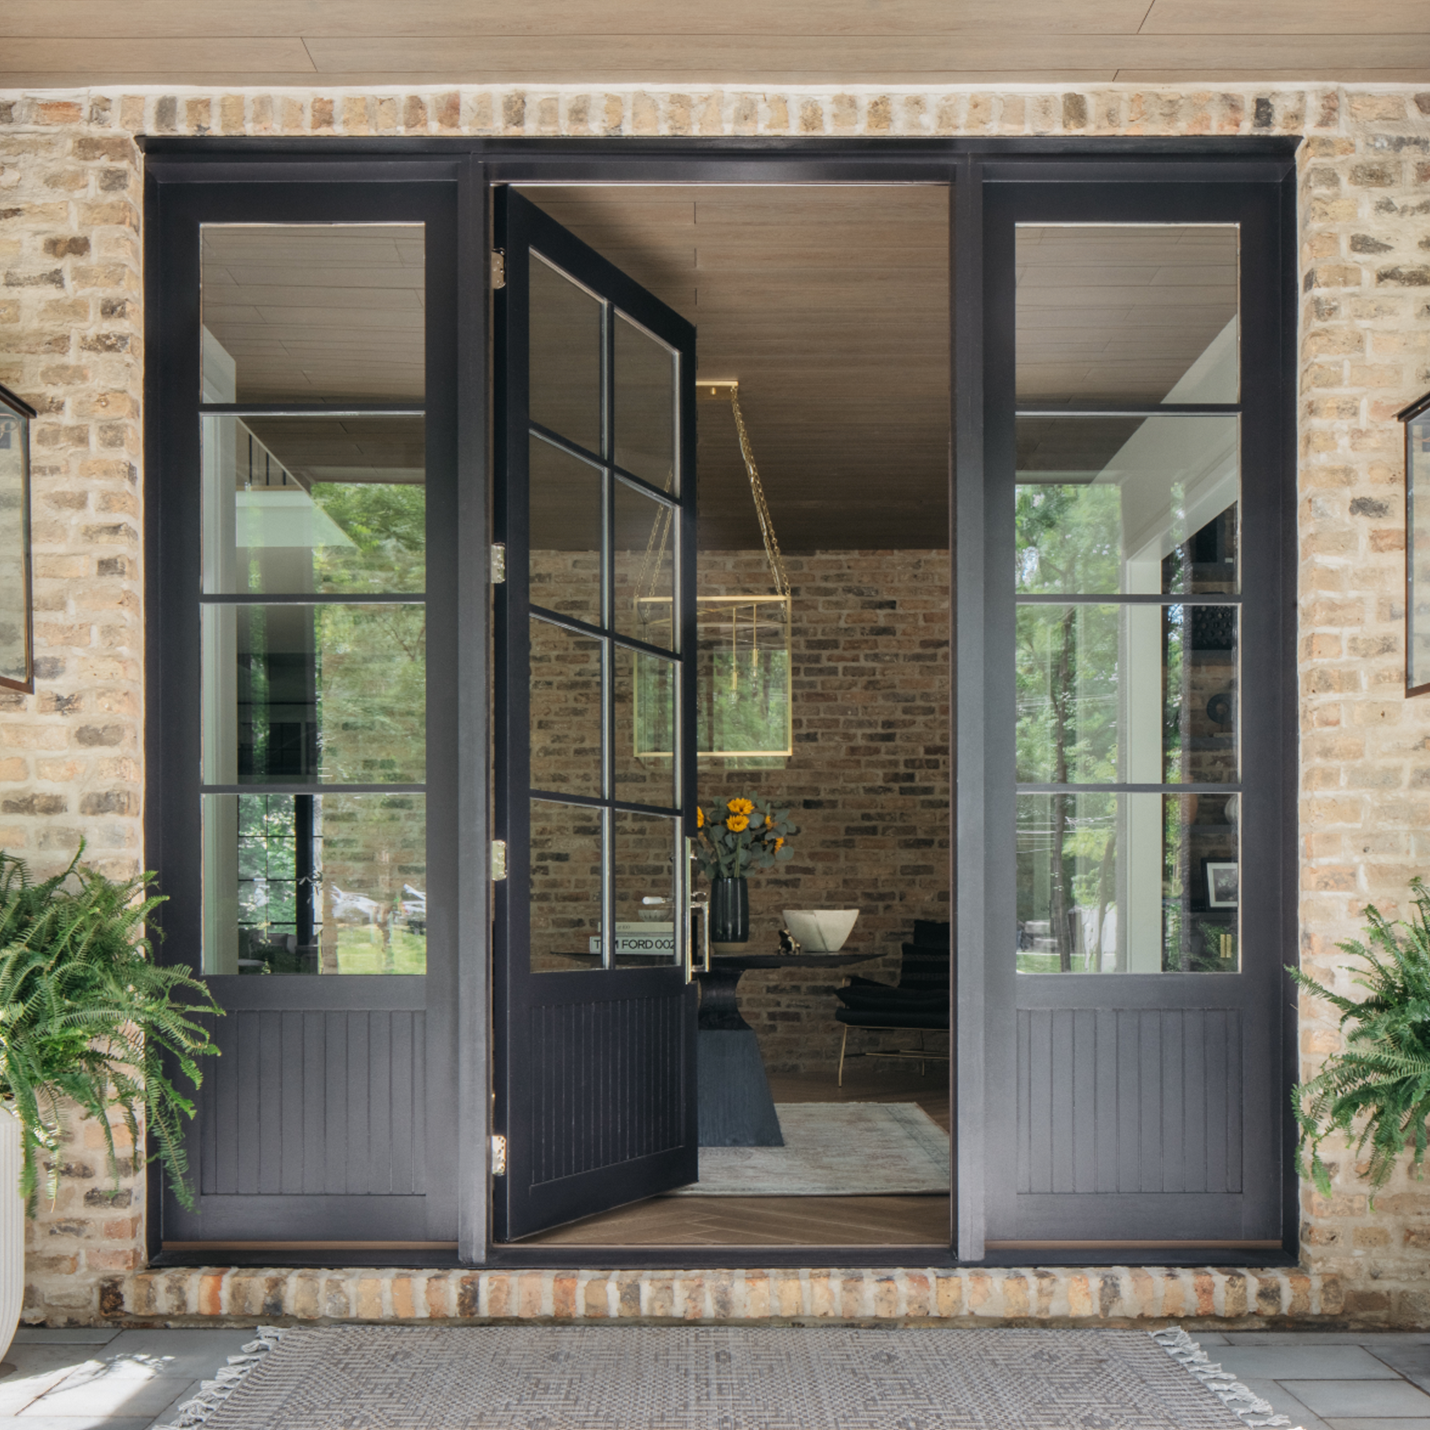 gloryirondoors insulated forged iron single french door with two sidelights in black color